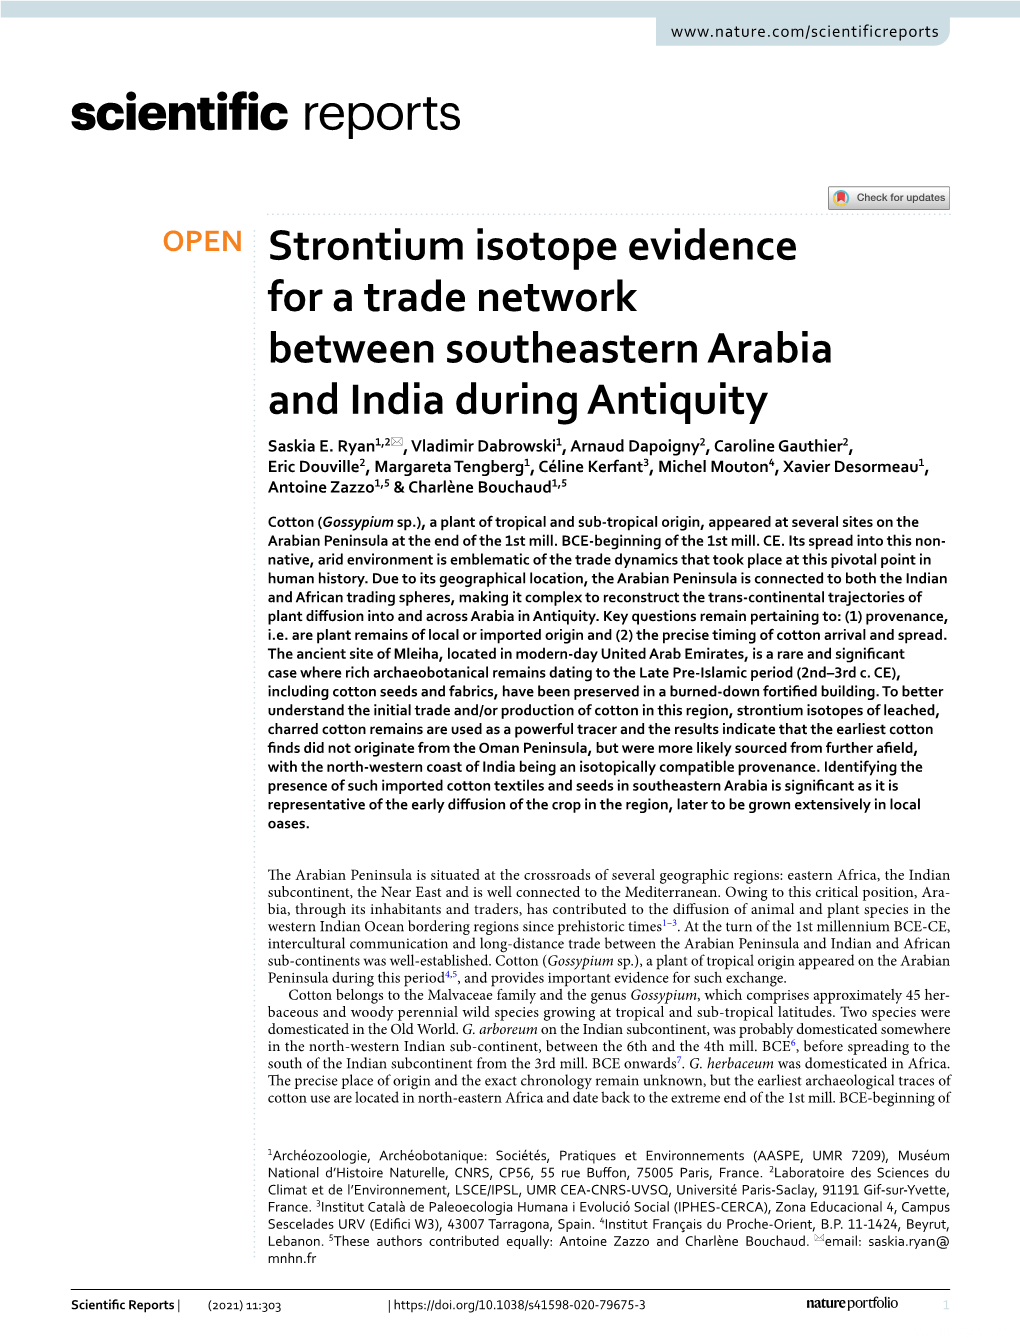 Strontium Isotope Evidence for a Trade Network Between Southeastern Arabia and India During Antiquity Saskia E